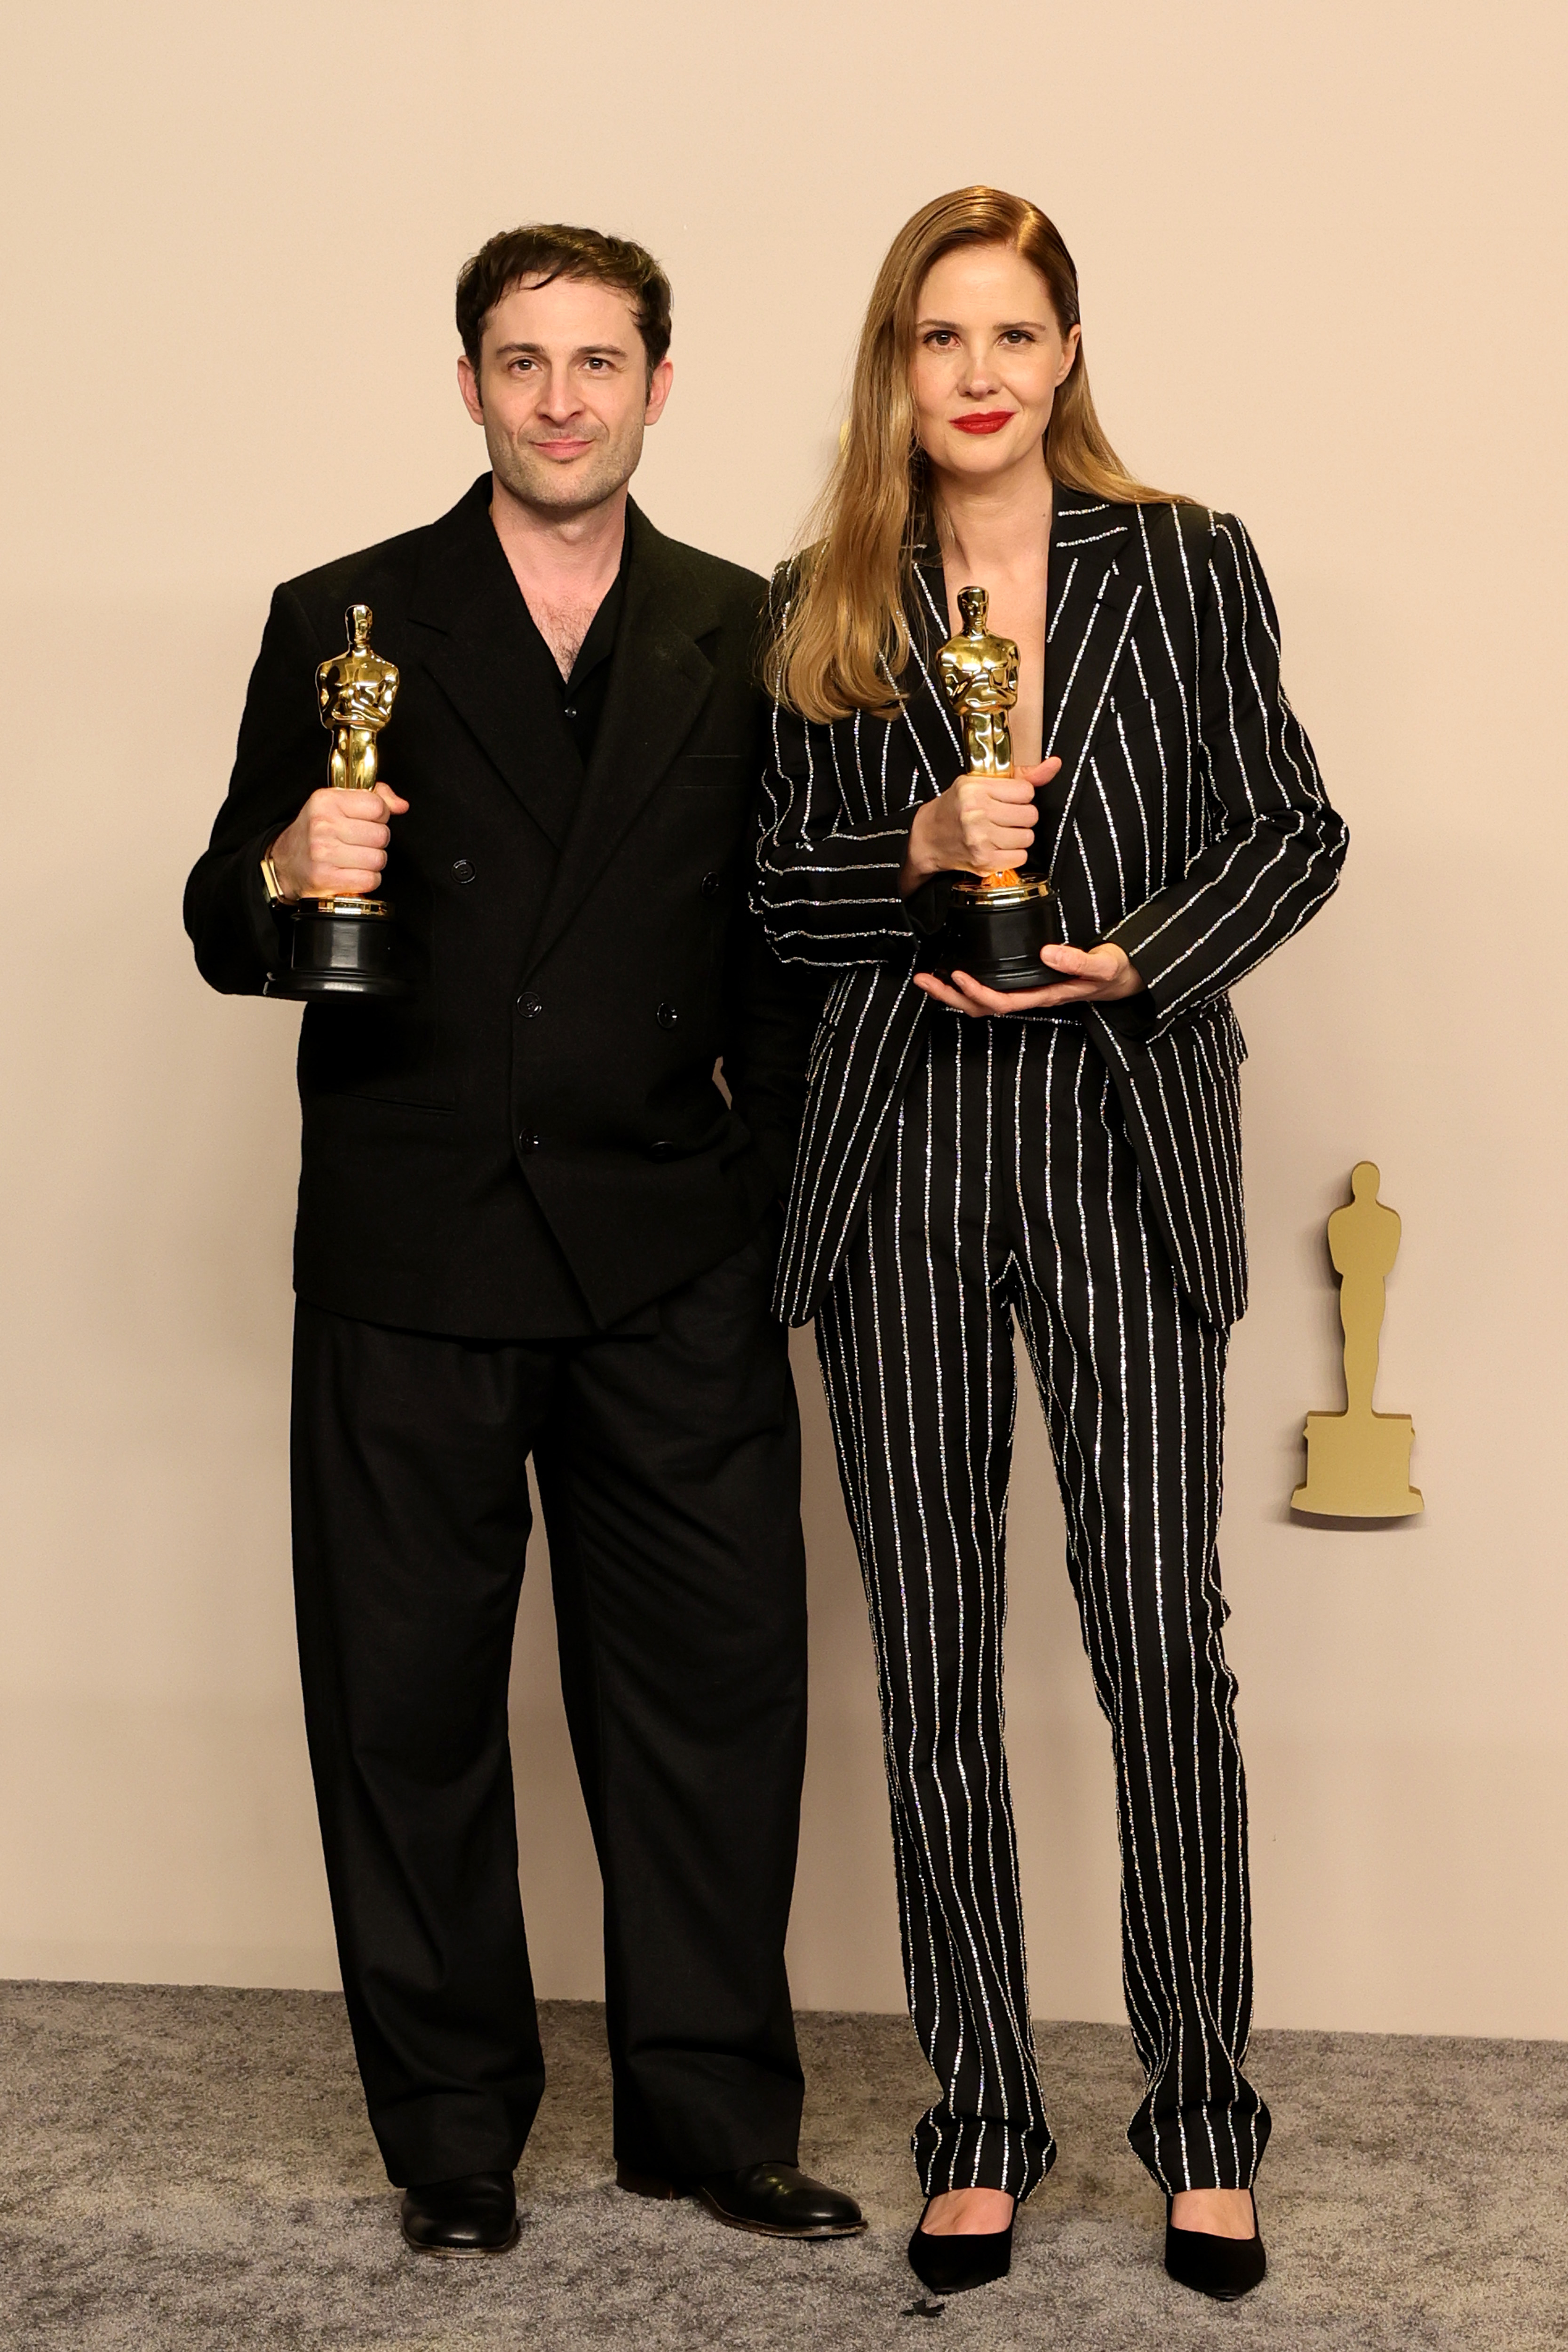 Arthur Harari and Justine Triet with their Oscars